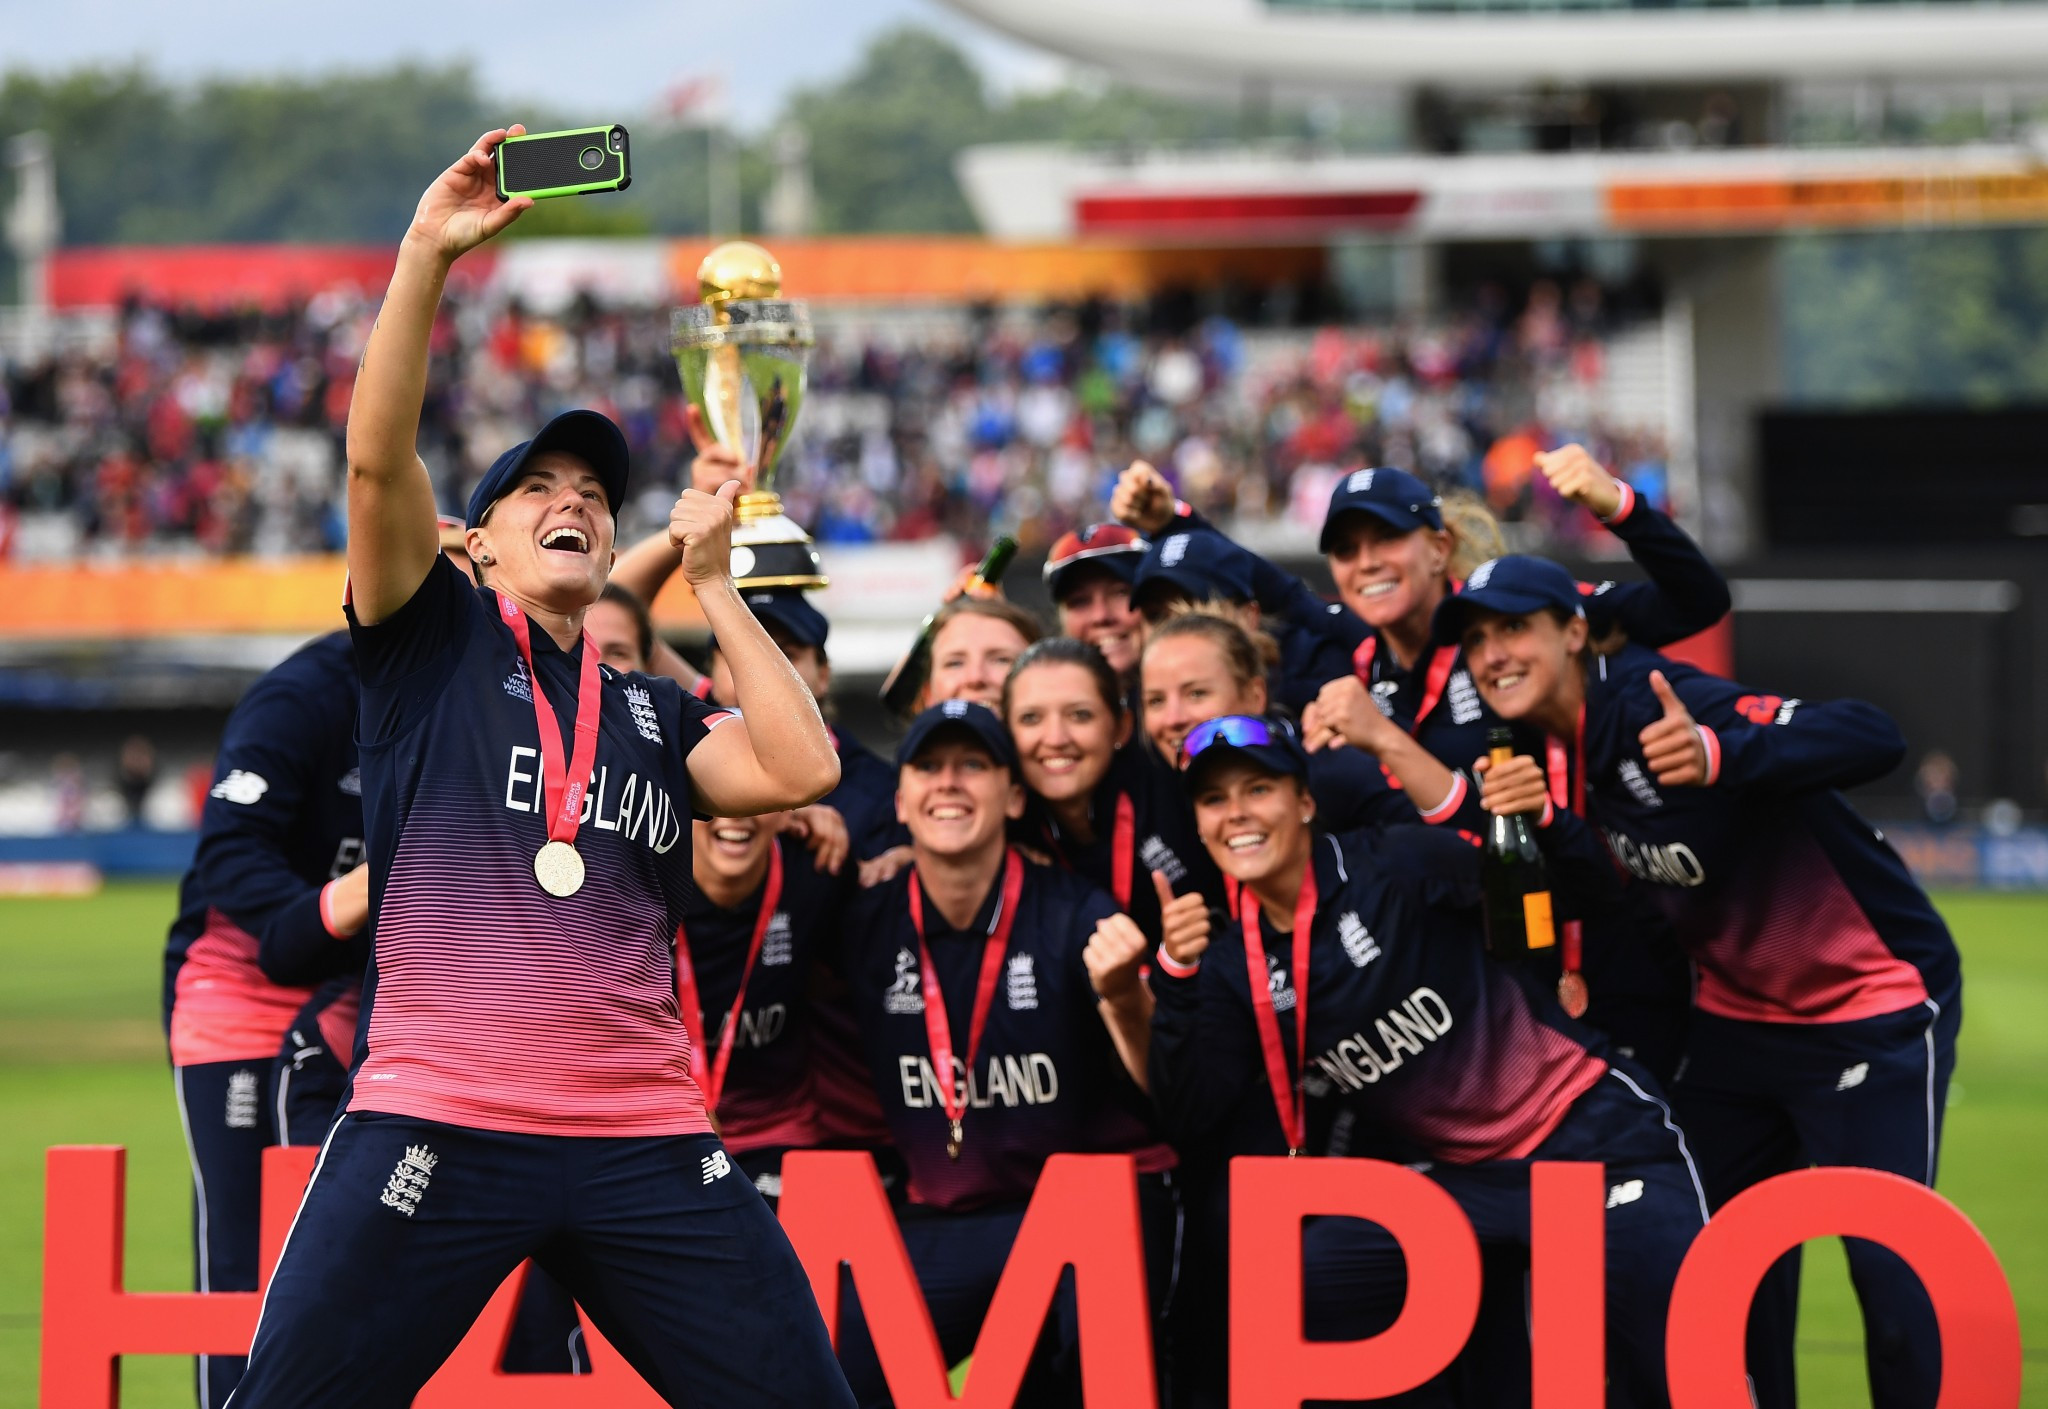 Women's Cricket World Cup sees massive increase in viewing figures